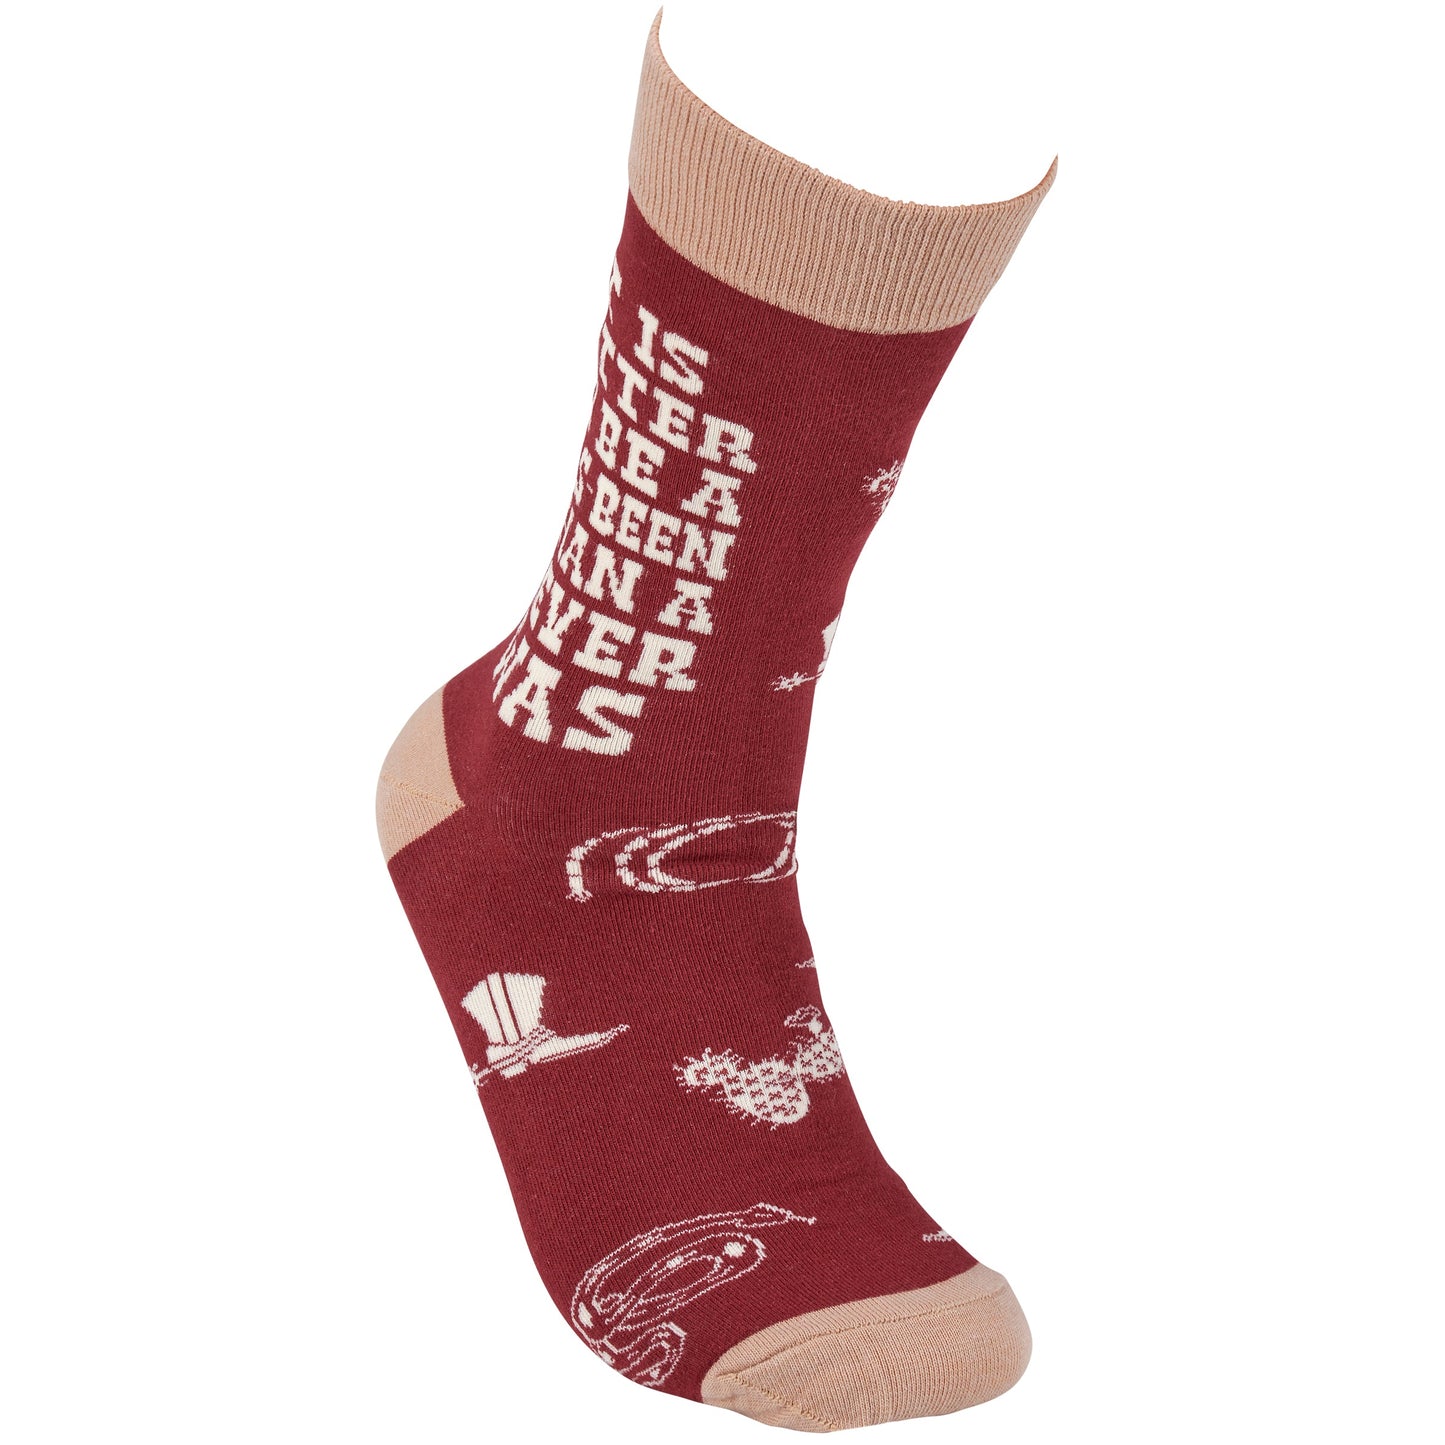 It Is Better To Be A Has-Been Than A Never Was Socks | Western-themed Socks